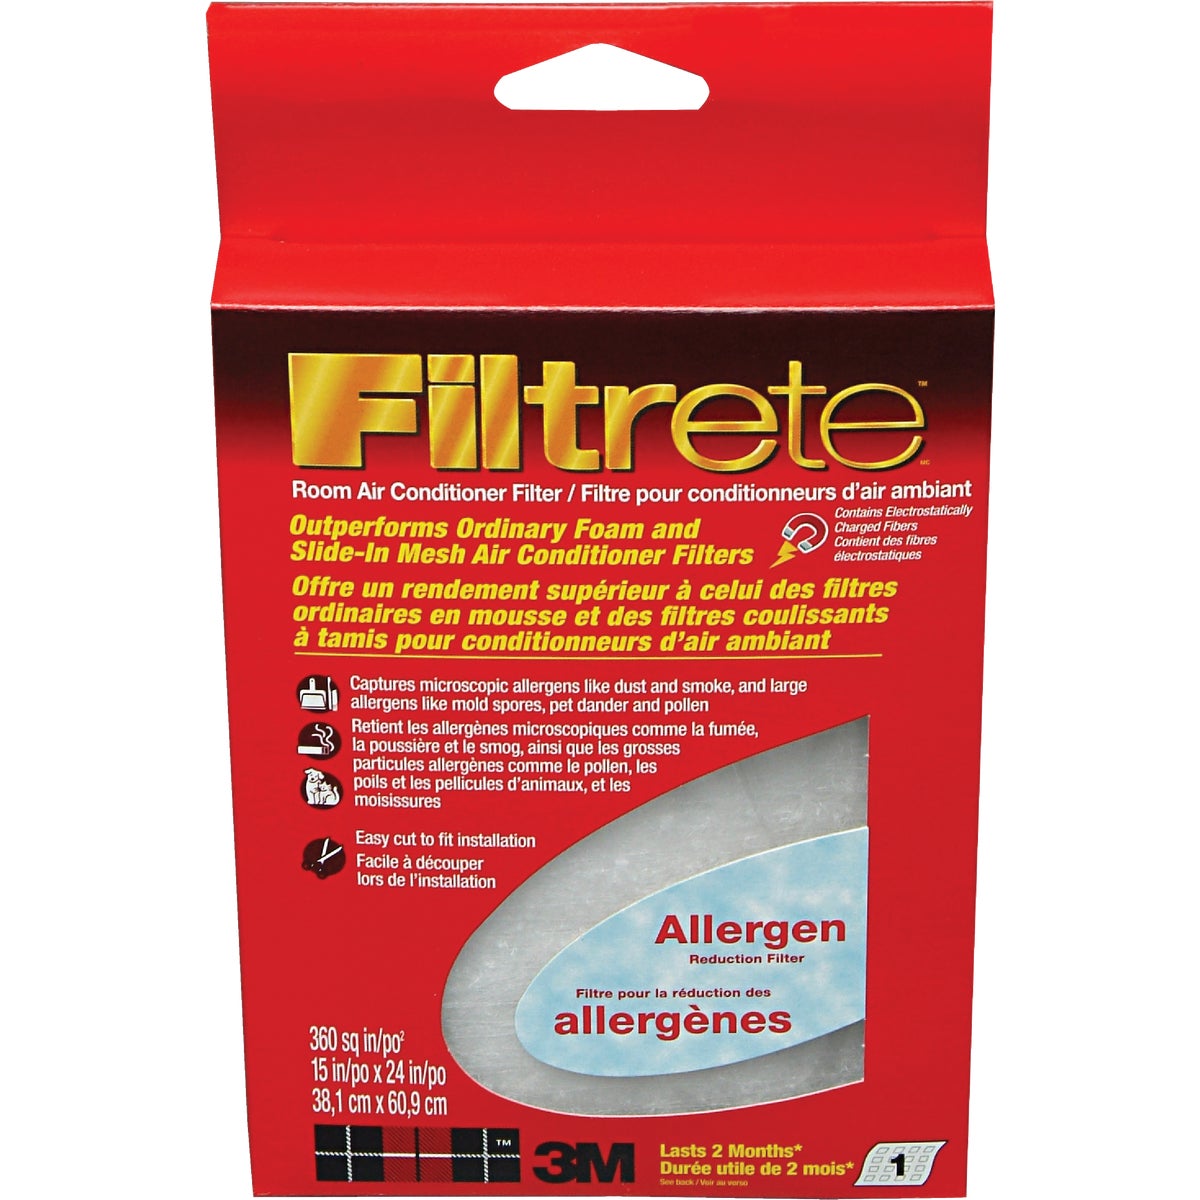 3M Filtrete 15 In. x 24 In. x 1/4 In. Room Air Conditioner Filter